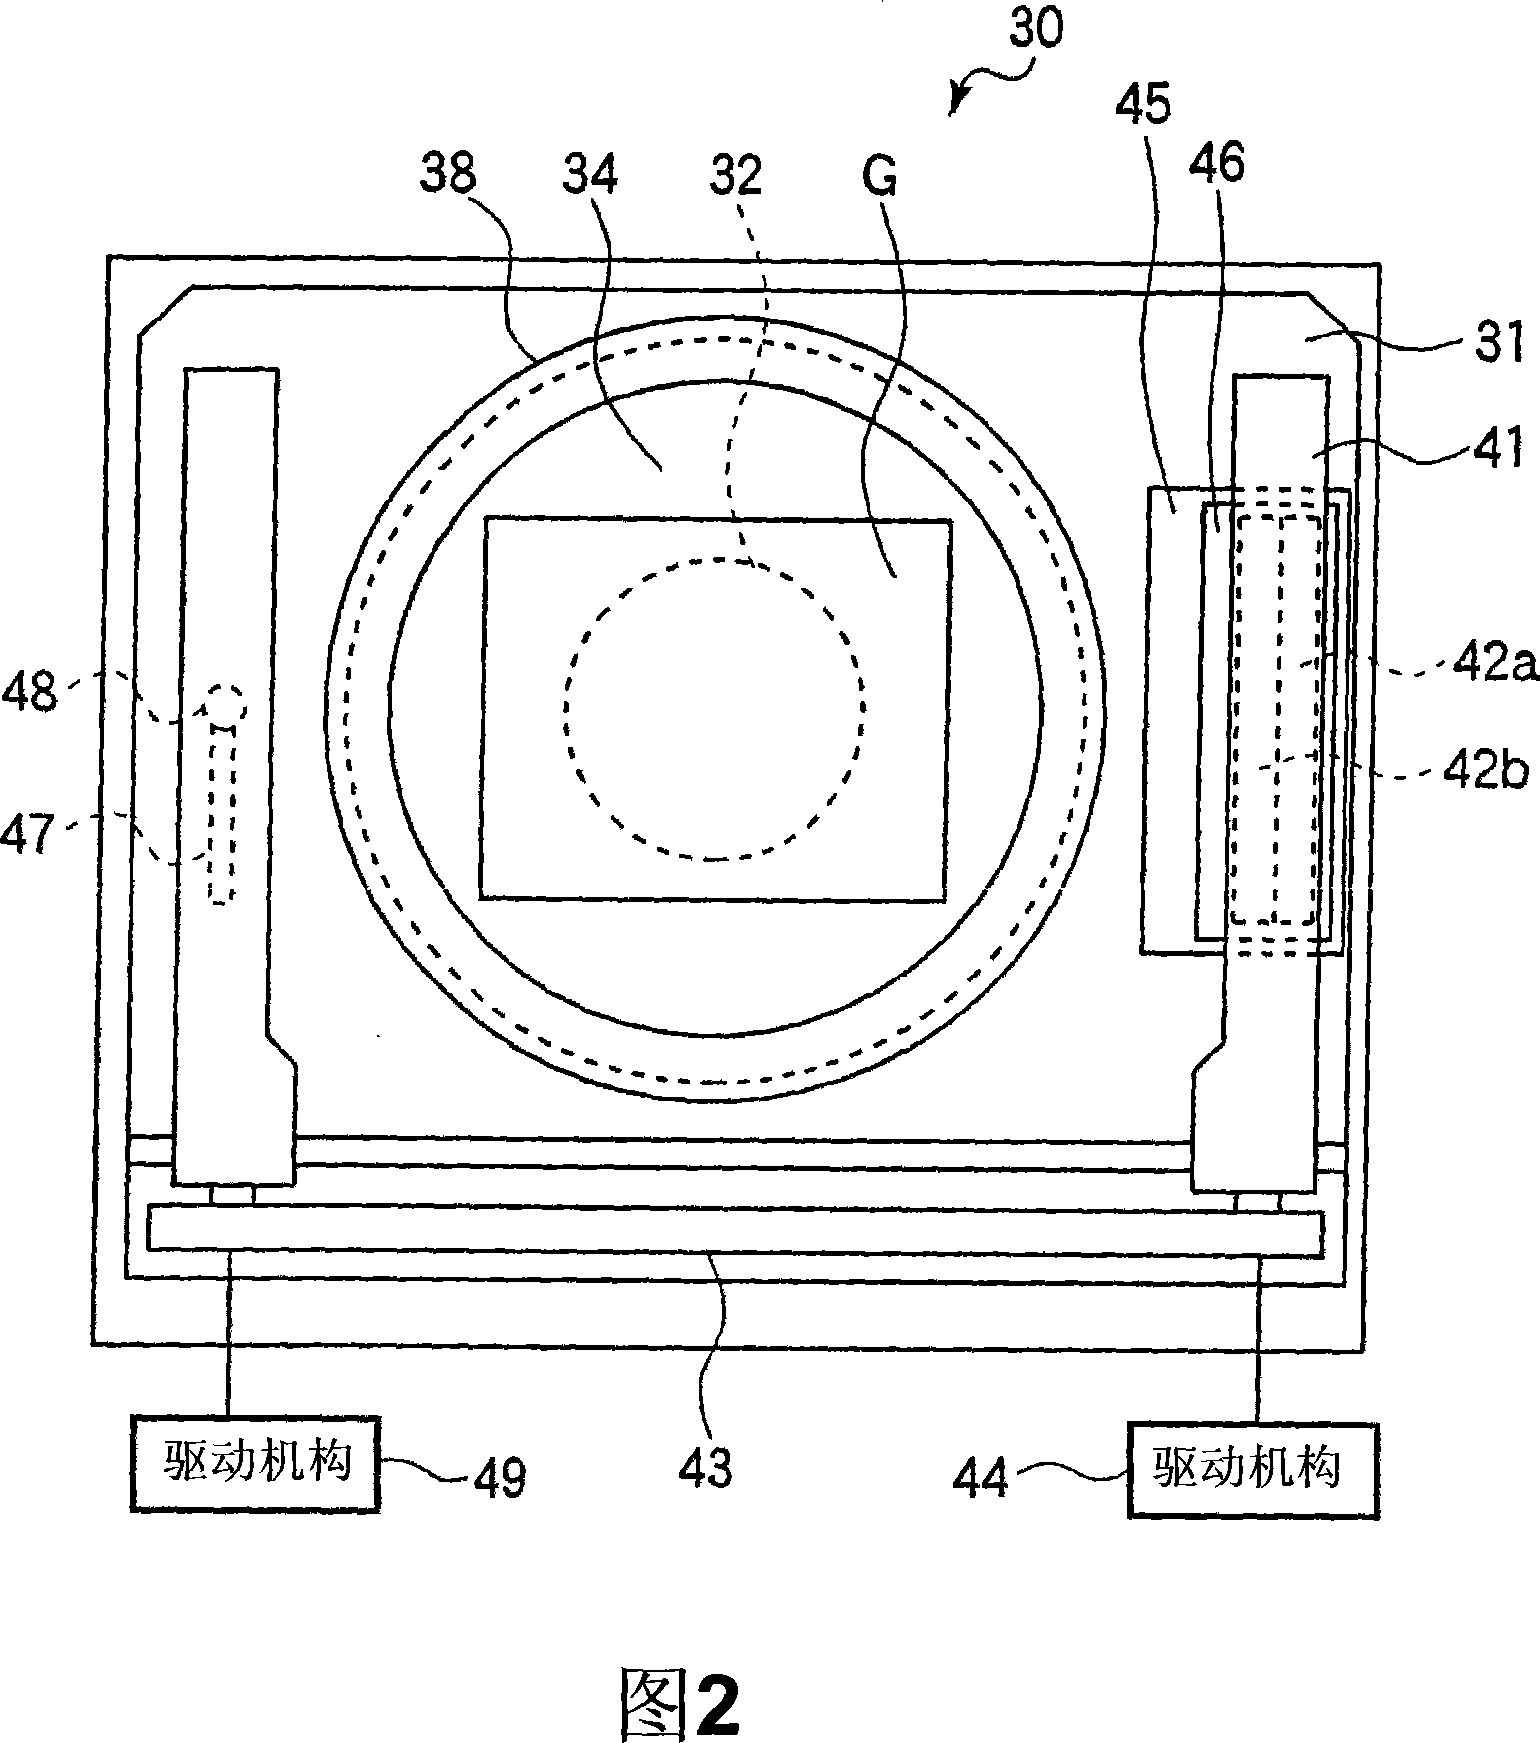 Reflow method, pattern generating method, and fabrication method for TFT element for LCD